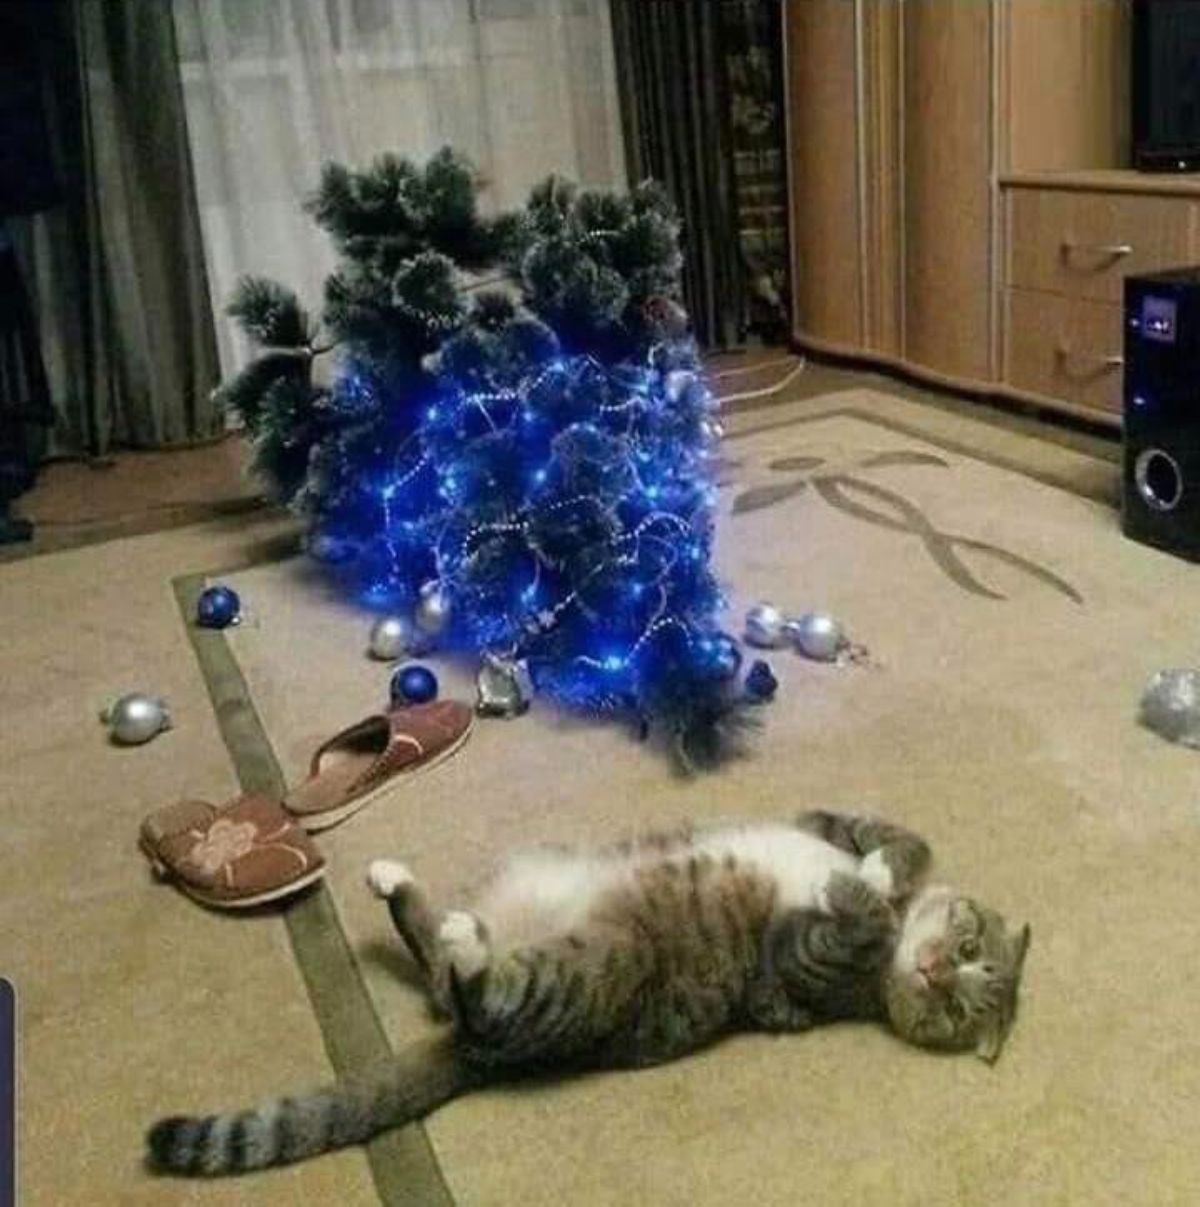 grey and white cat laying belly up on brown carpet next to a christmas tree toppled on the floor